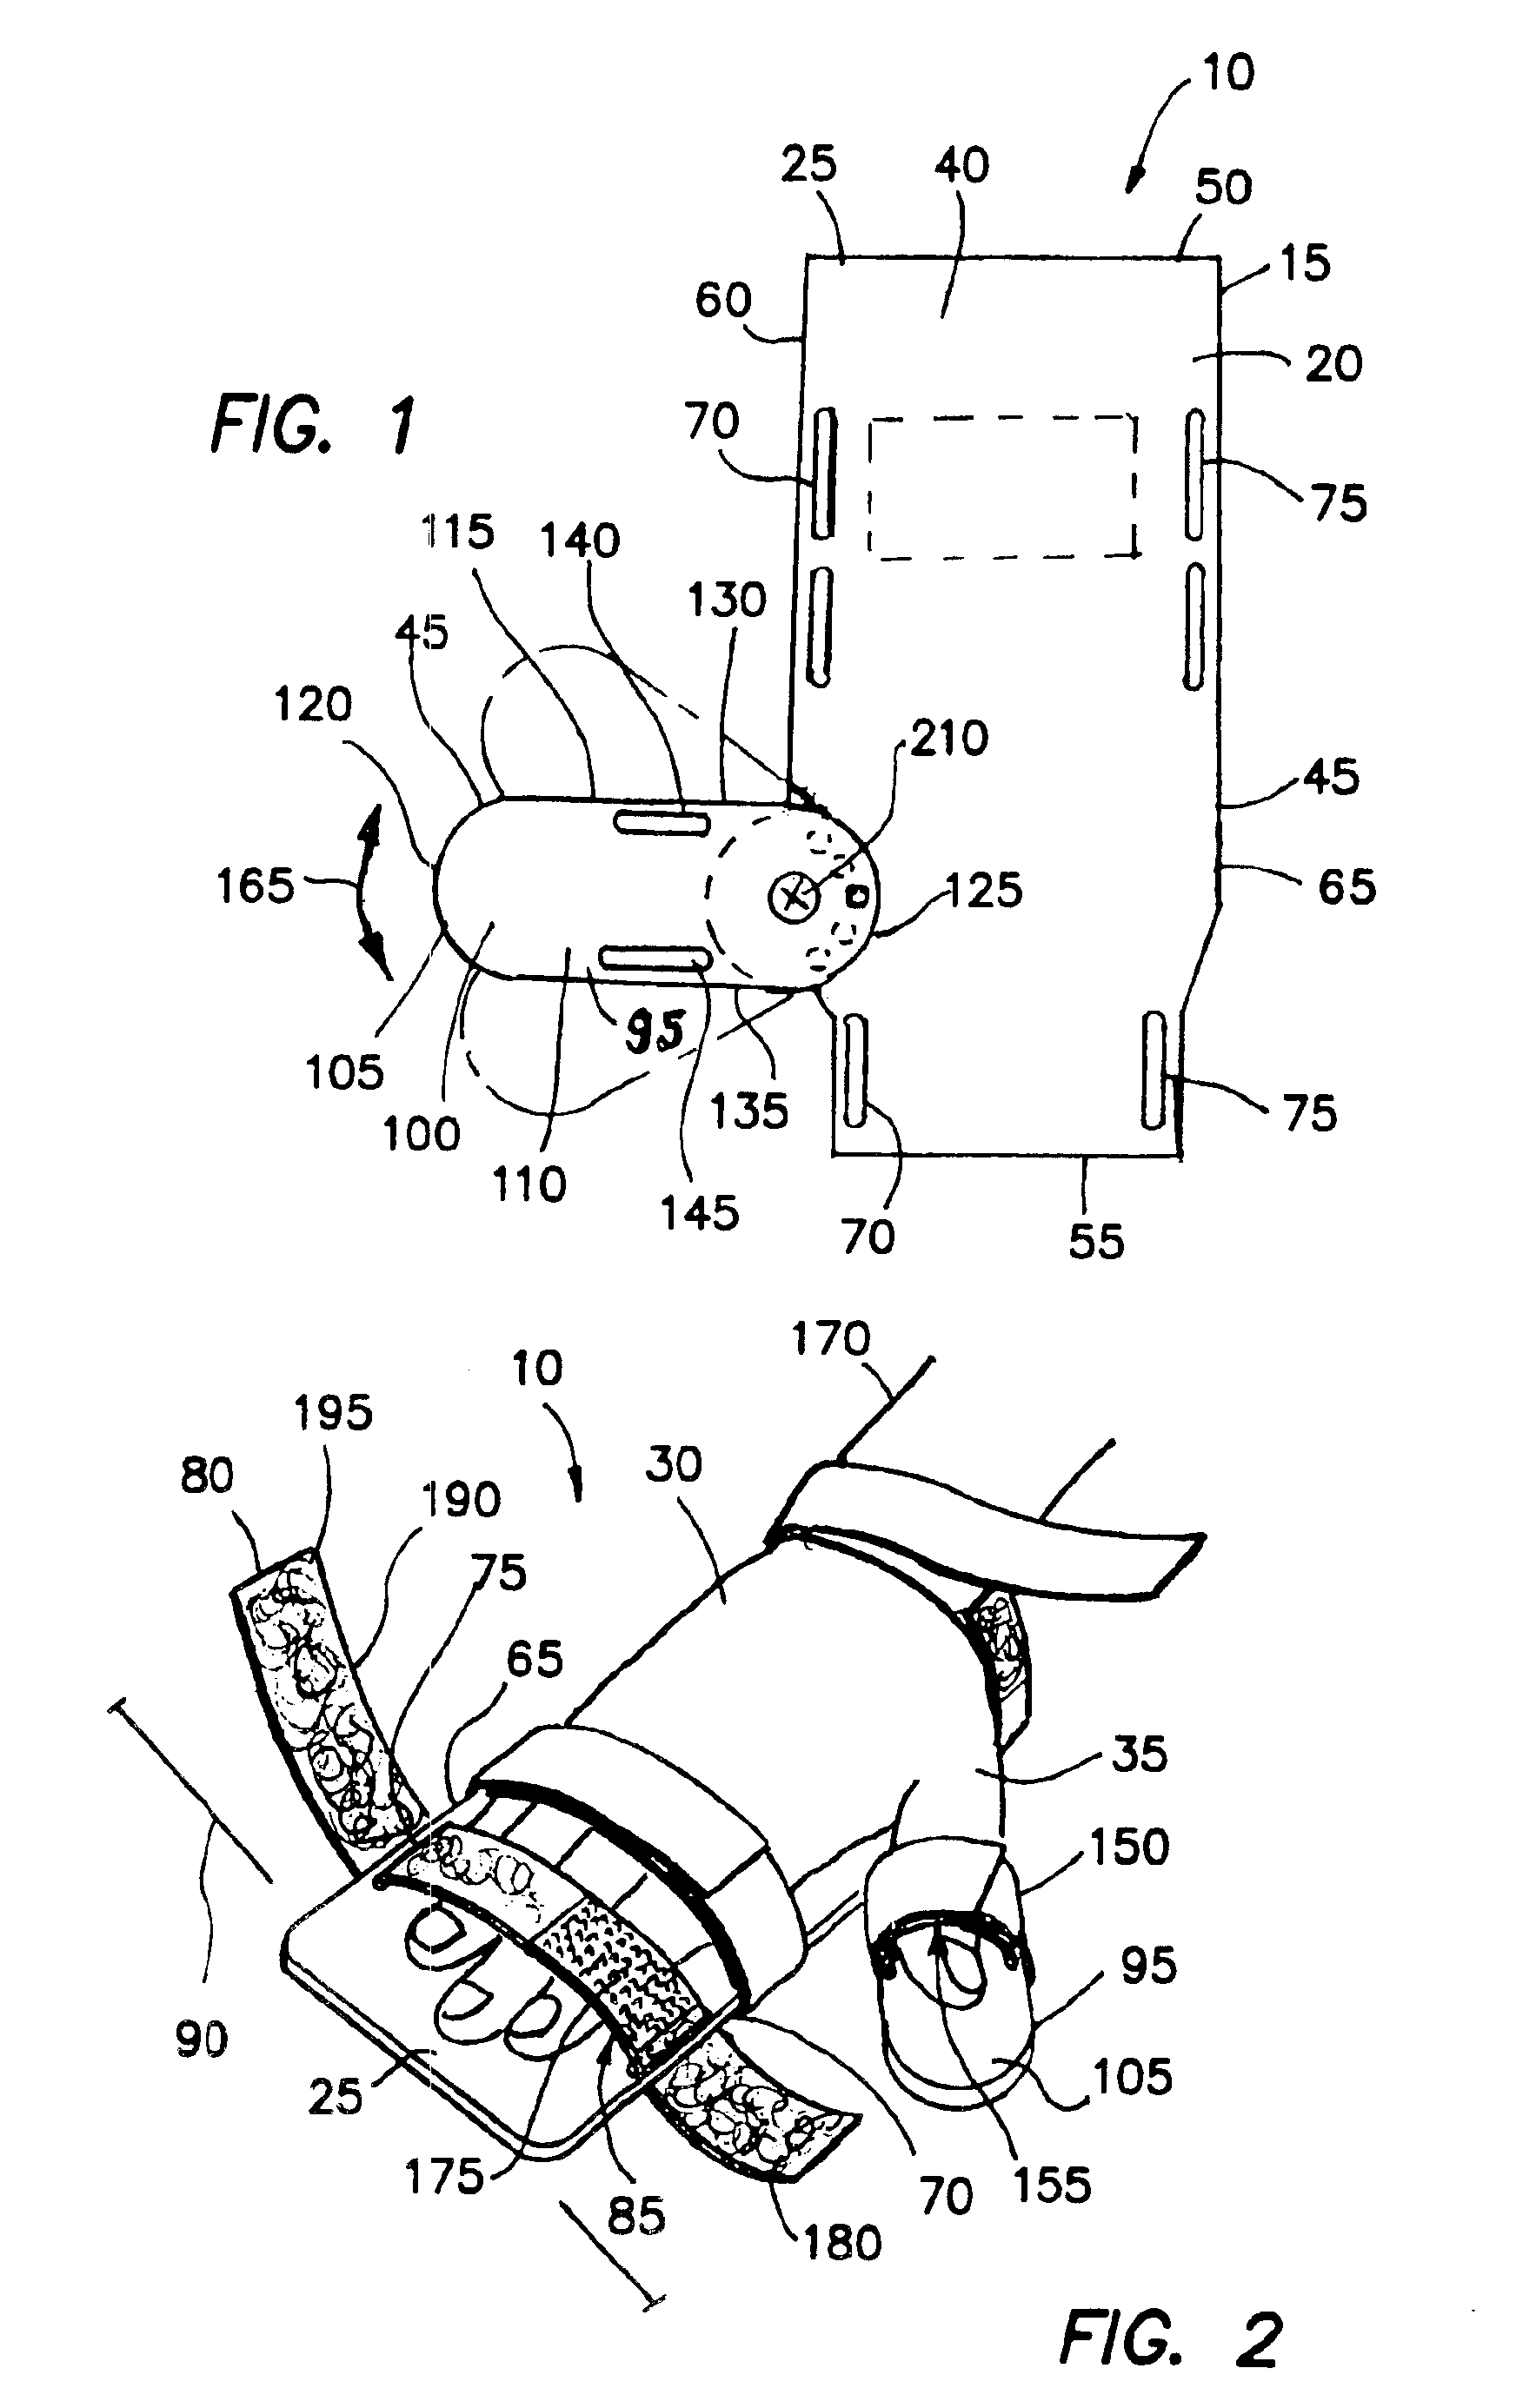 Antispasticity aid device and related accessories